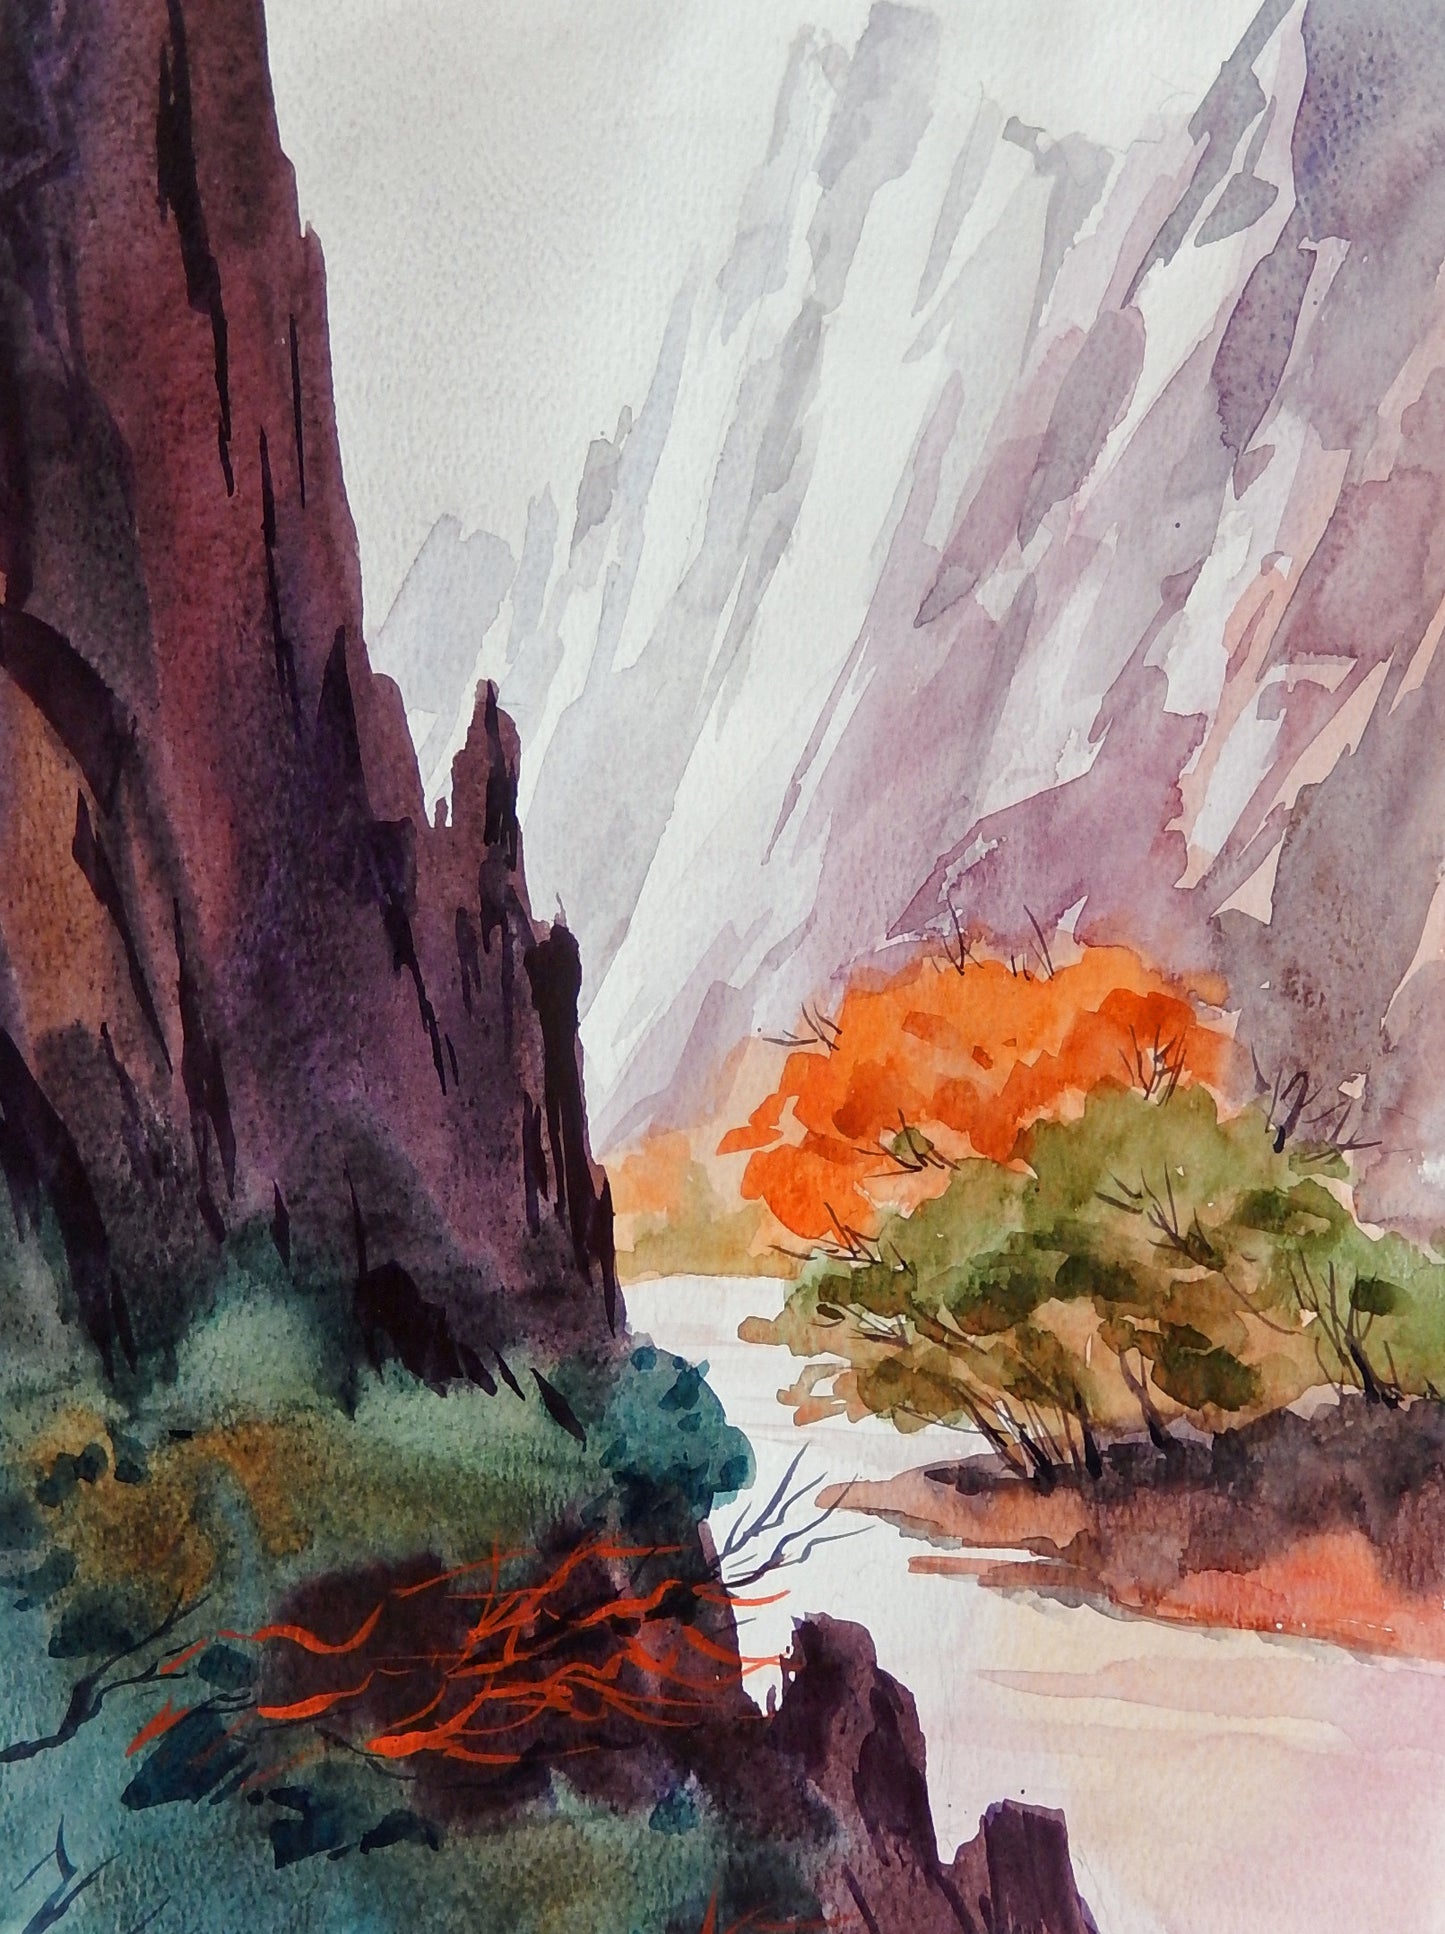 At the Bottom of the Canyon, inspired by Carl Lee Purcell